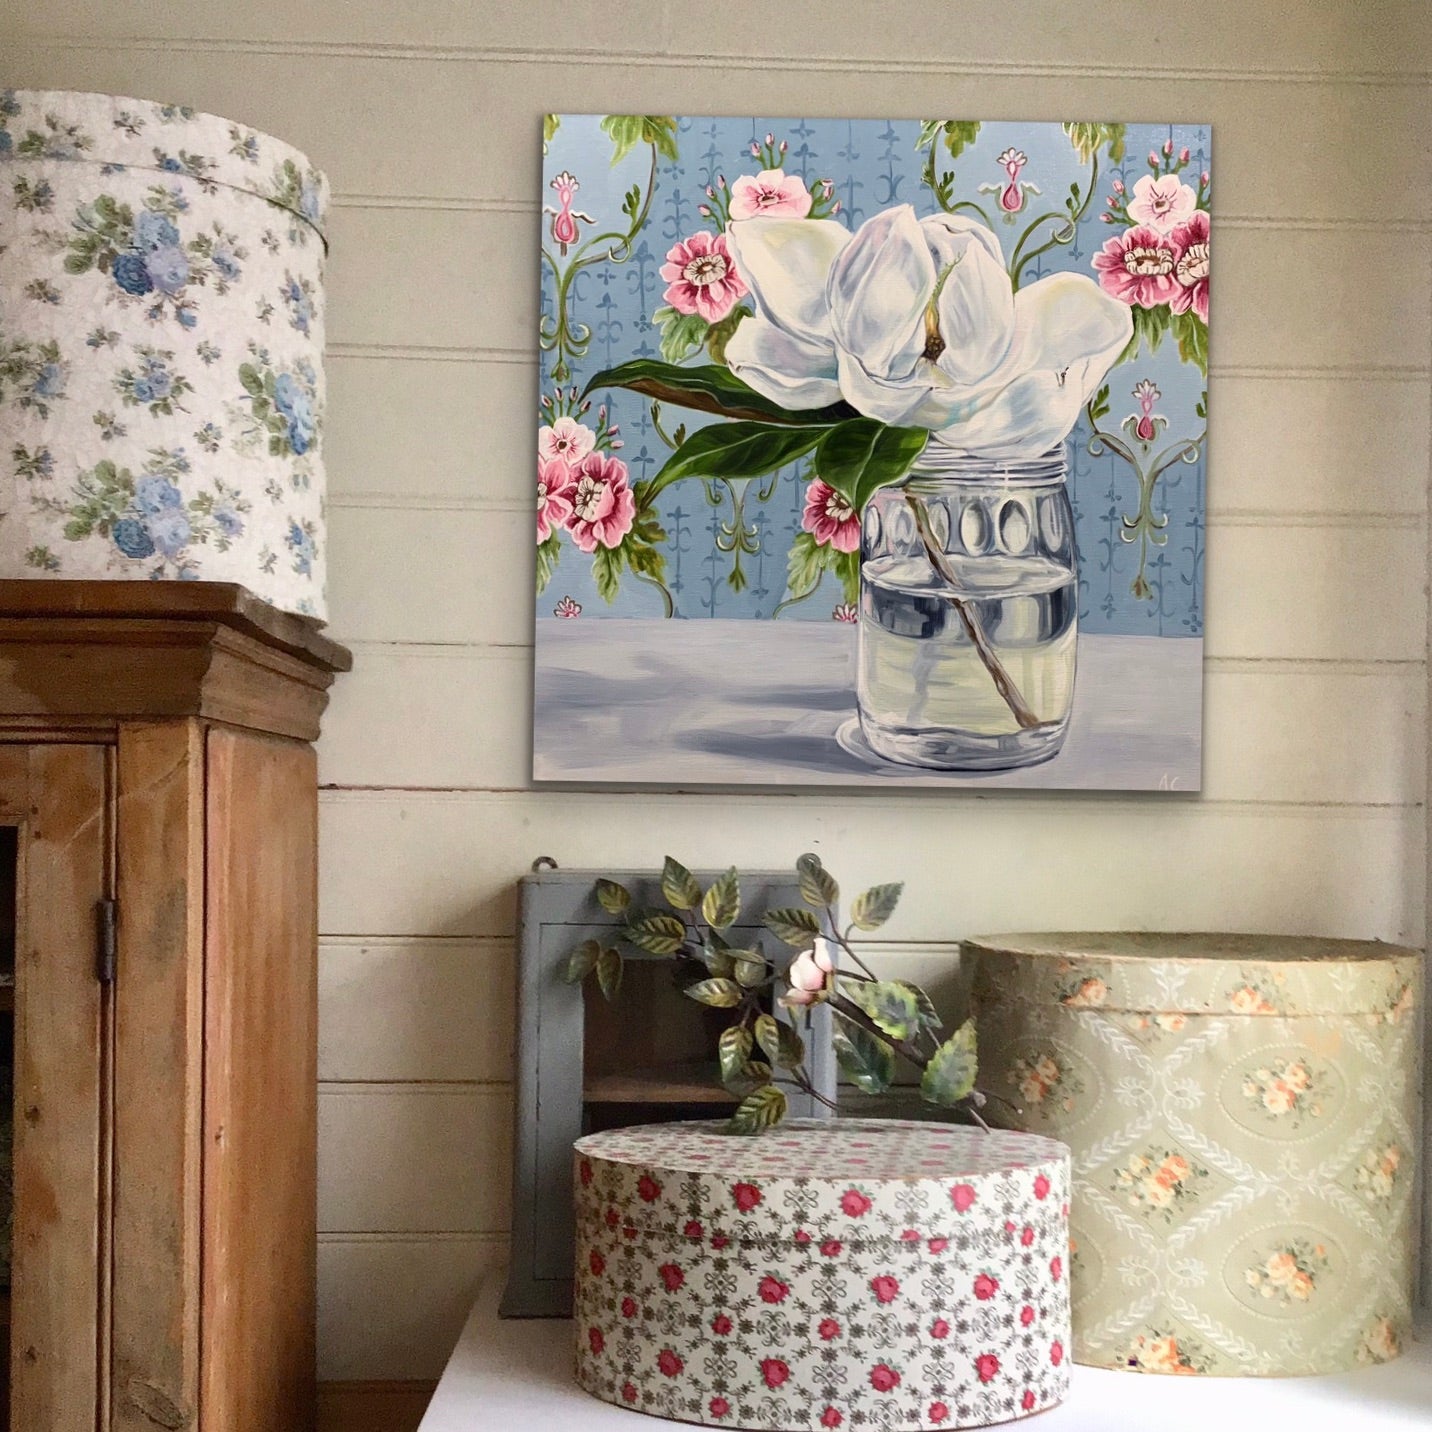 Magnolia and the Vintage Wallpaper